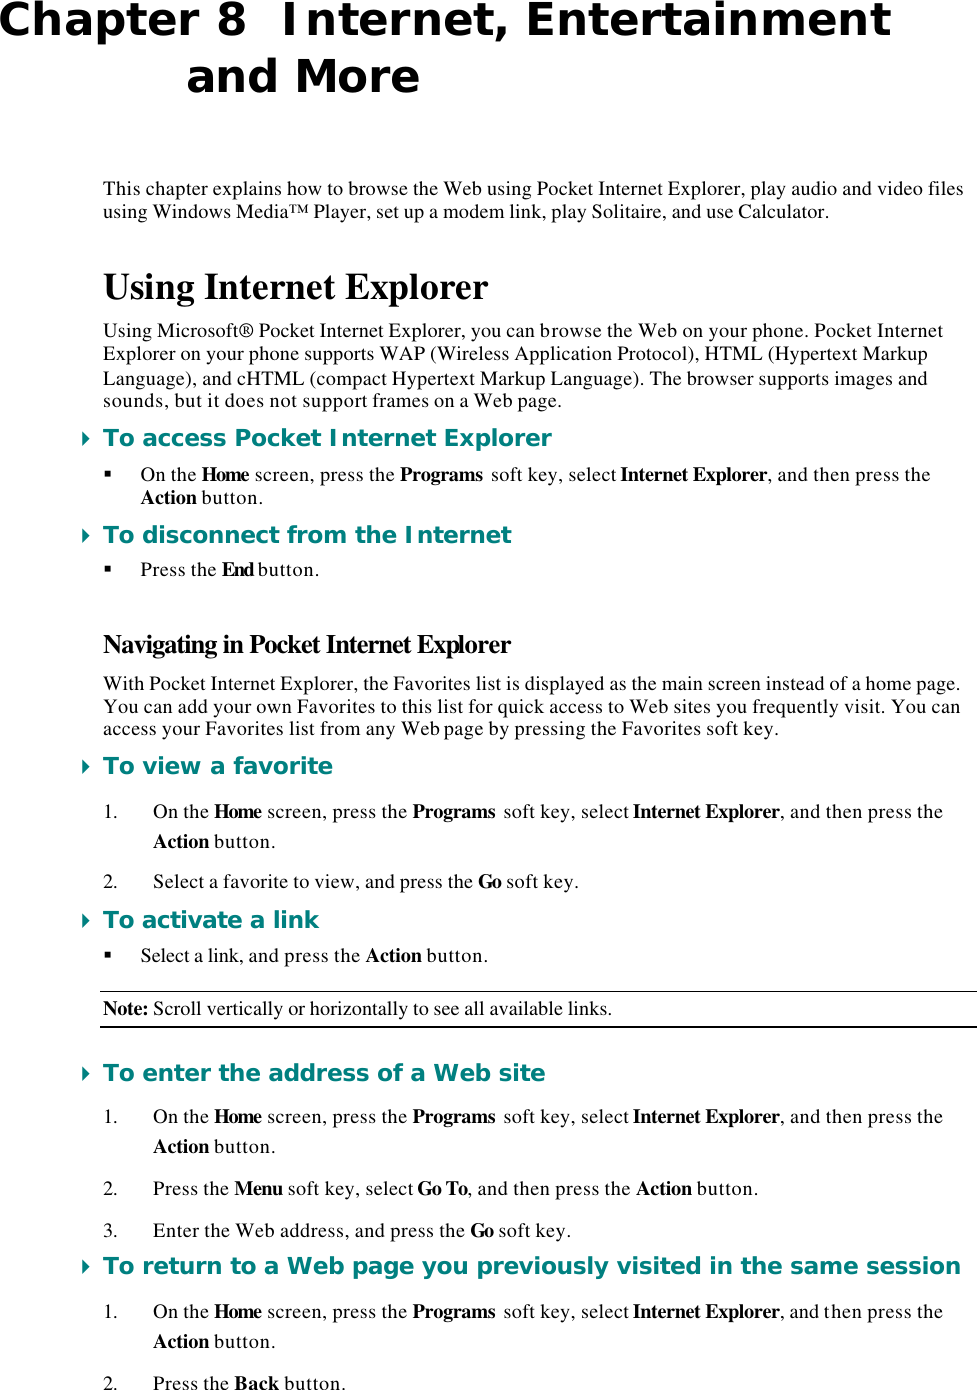 Chapter 8  Internet, Entertainment and More This chapter explains how to browse the Web using Pocket Internet Explorer, play audio and video files using Windows Media™ Player, set up a modem link, play Solitaire, and use Calculator. Using Internet Explorer Using Microsoft® Pocket Internet Explorer, you can browse the Web on your phone. Pocket Internet Explorer on your phone supports WAP (Wireless Application Protocol), HTML (Hypertext Markup Language), and cHTML (compact Hypertext Markup Language). The browser supports images and sounds, but it does not support frames on a Web page. 4 To access Pocket Internet Explorer § On the Home screen, press the Programs soft key, select Internet Explorer, and then press the Action button. 4 To disconnect from the Internet § Press the End button. Navigating in Pocket Internet Explorer With Pocket Internet Explorer, the Favorites list is displayed as the main screen instead of a home page. You can add your own Favorites to this list for quick access to Web sites you frequently visit. You can access your Favorites list from any Web page by pressing the Favorites soft key. 4 To view a favorite 1. On the Home screen, press the Programs soft key, select Internet Explorer, and then press the Action button. 2. Select a favorite to view, and press the Go soft key. 4 To activate a link § Select a link, and press the Action button. Note: Scroll vertically or horizontally to see all available links. 4 To enter the address of a Web site 1. On the Home screen, press the Programs soft key, select Internet Explorer, and then press the Action button. 2. Press the Menu soft key, select Go To, and then press the Action button. 3. Enter the Web address, and press the Go soft key. 4 To return to a Web page you previously visited in the same session 1. On the Home screen, press the Programs soft key, select Internet Explorer, and then press the Action button. 2. Press the Back button. 